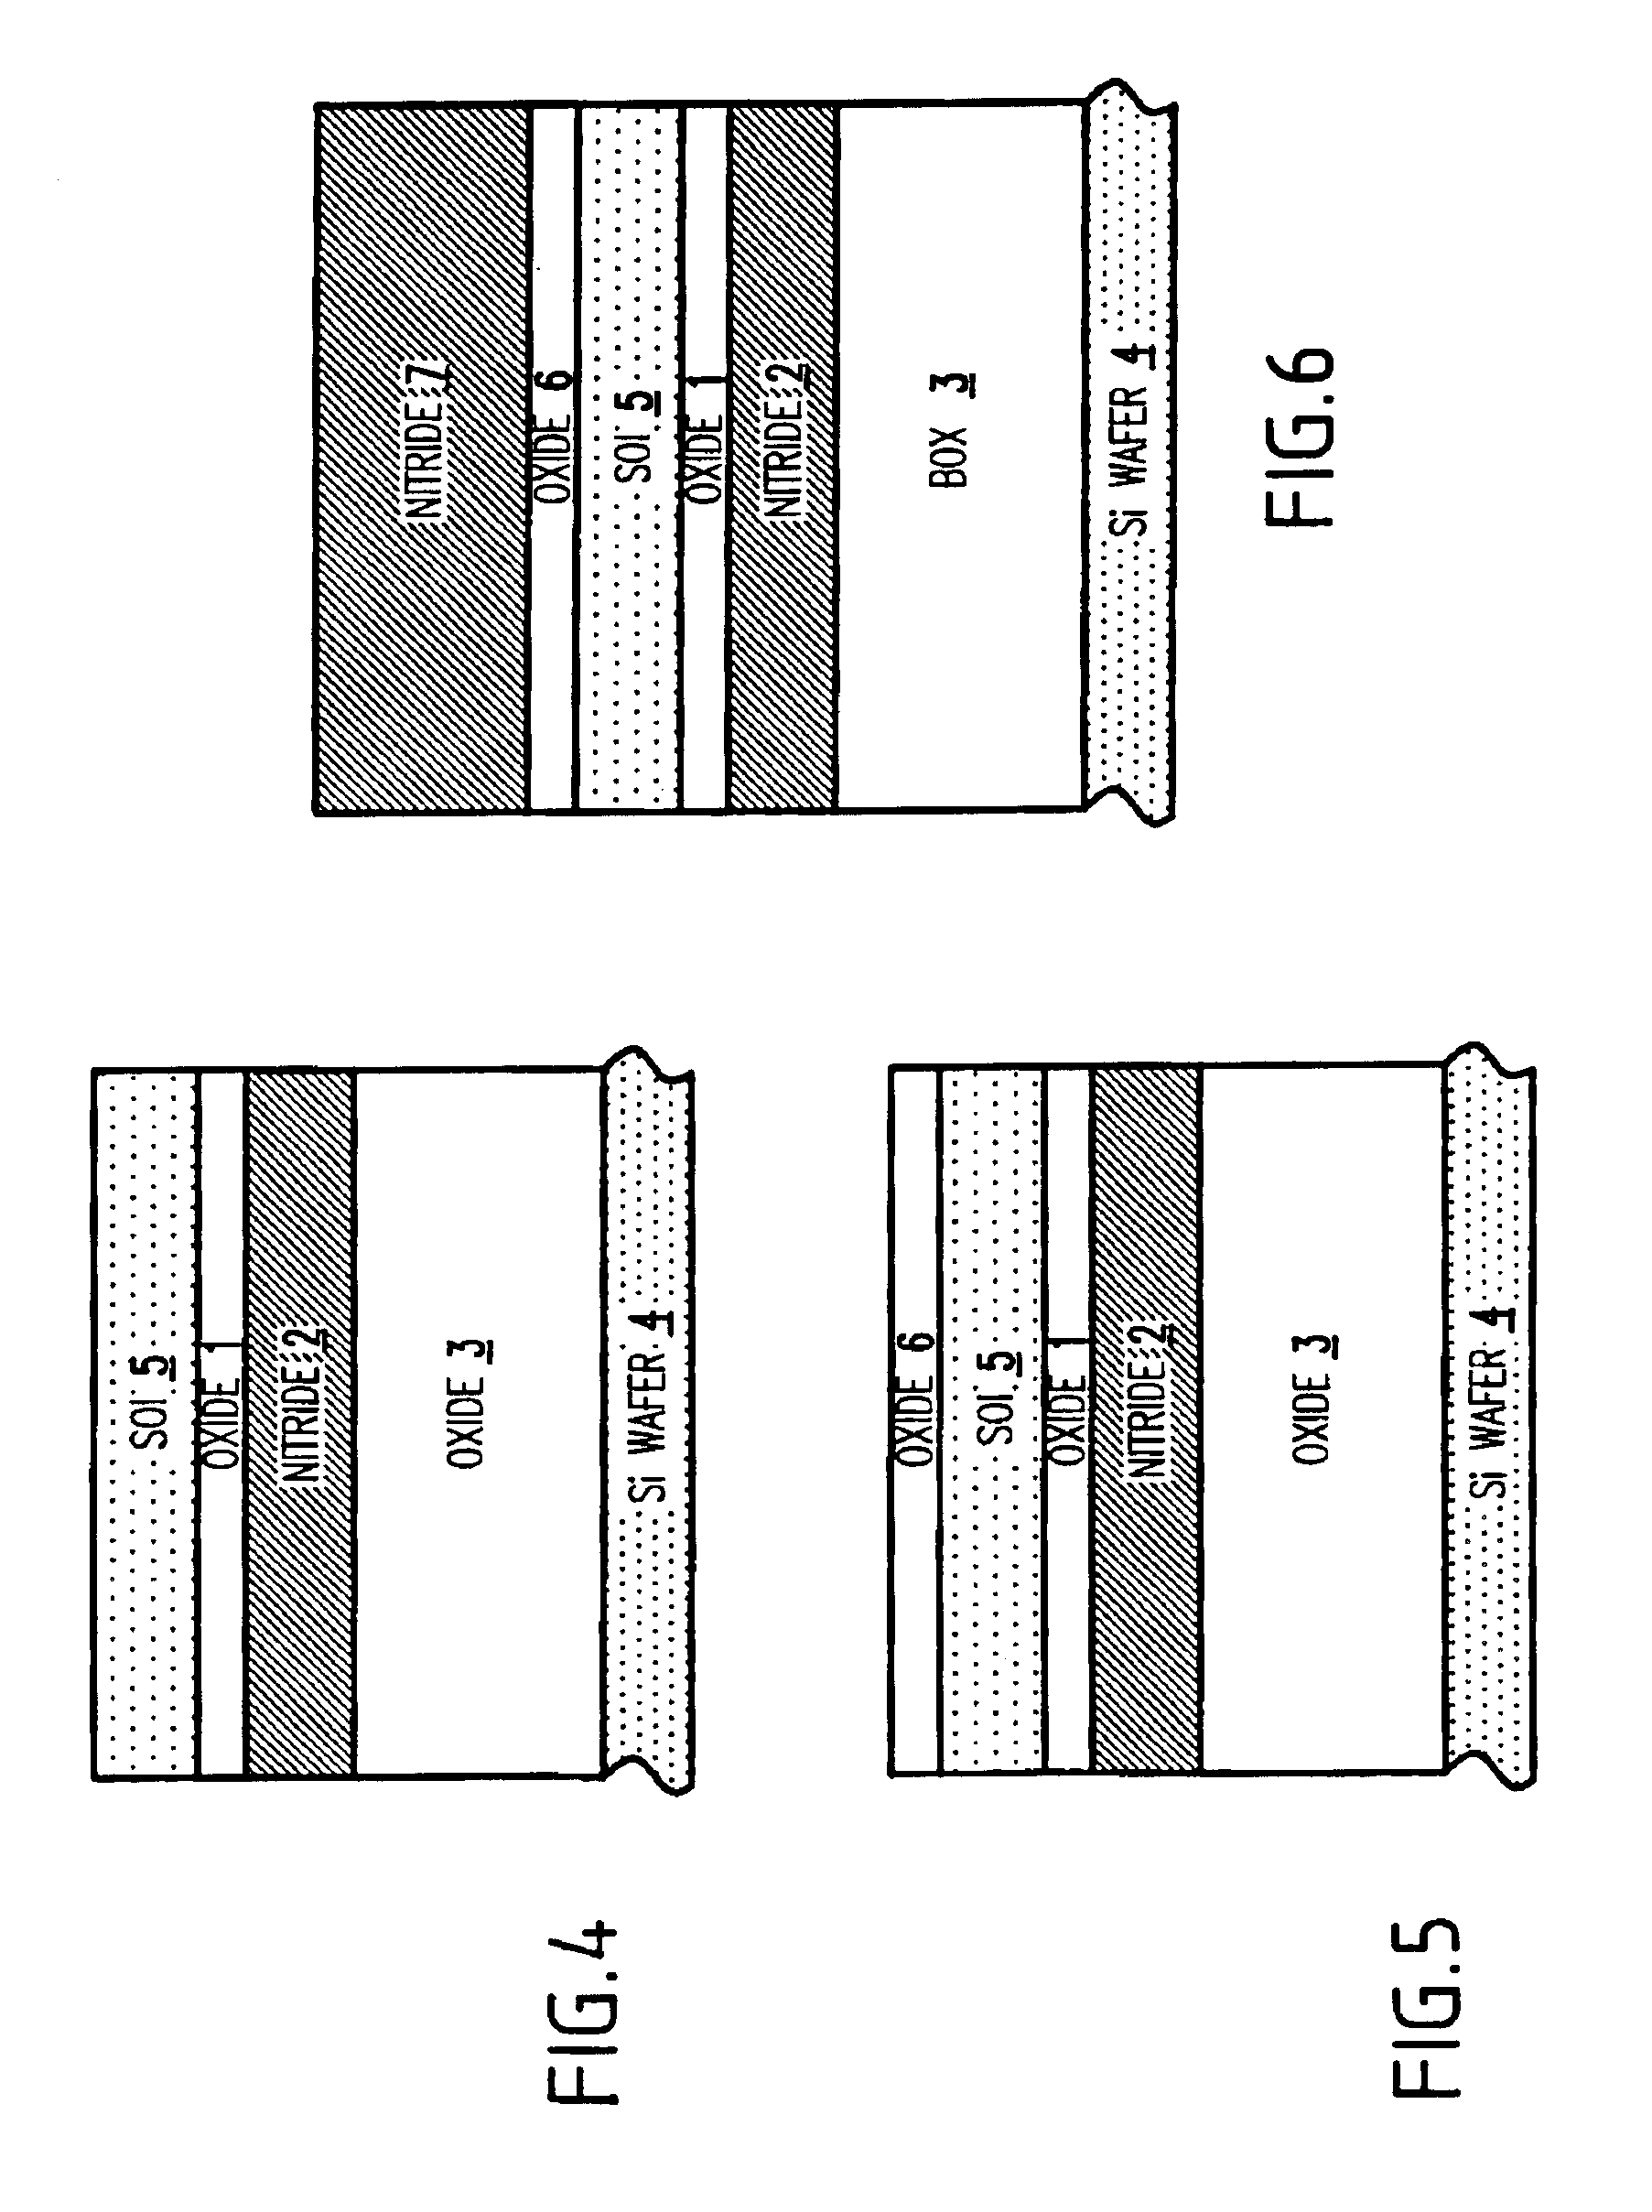 Self-aligned gate MOSFET with separate gates